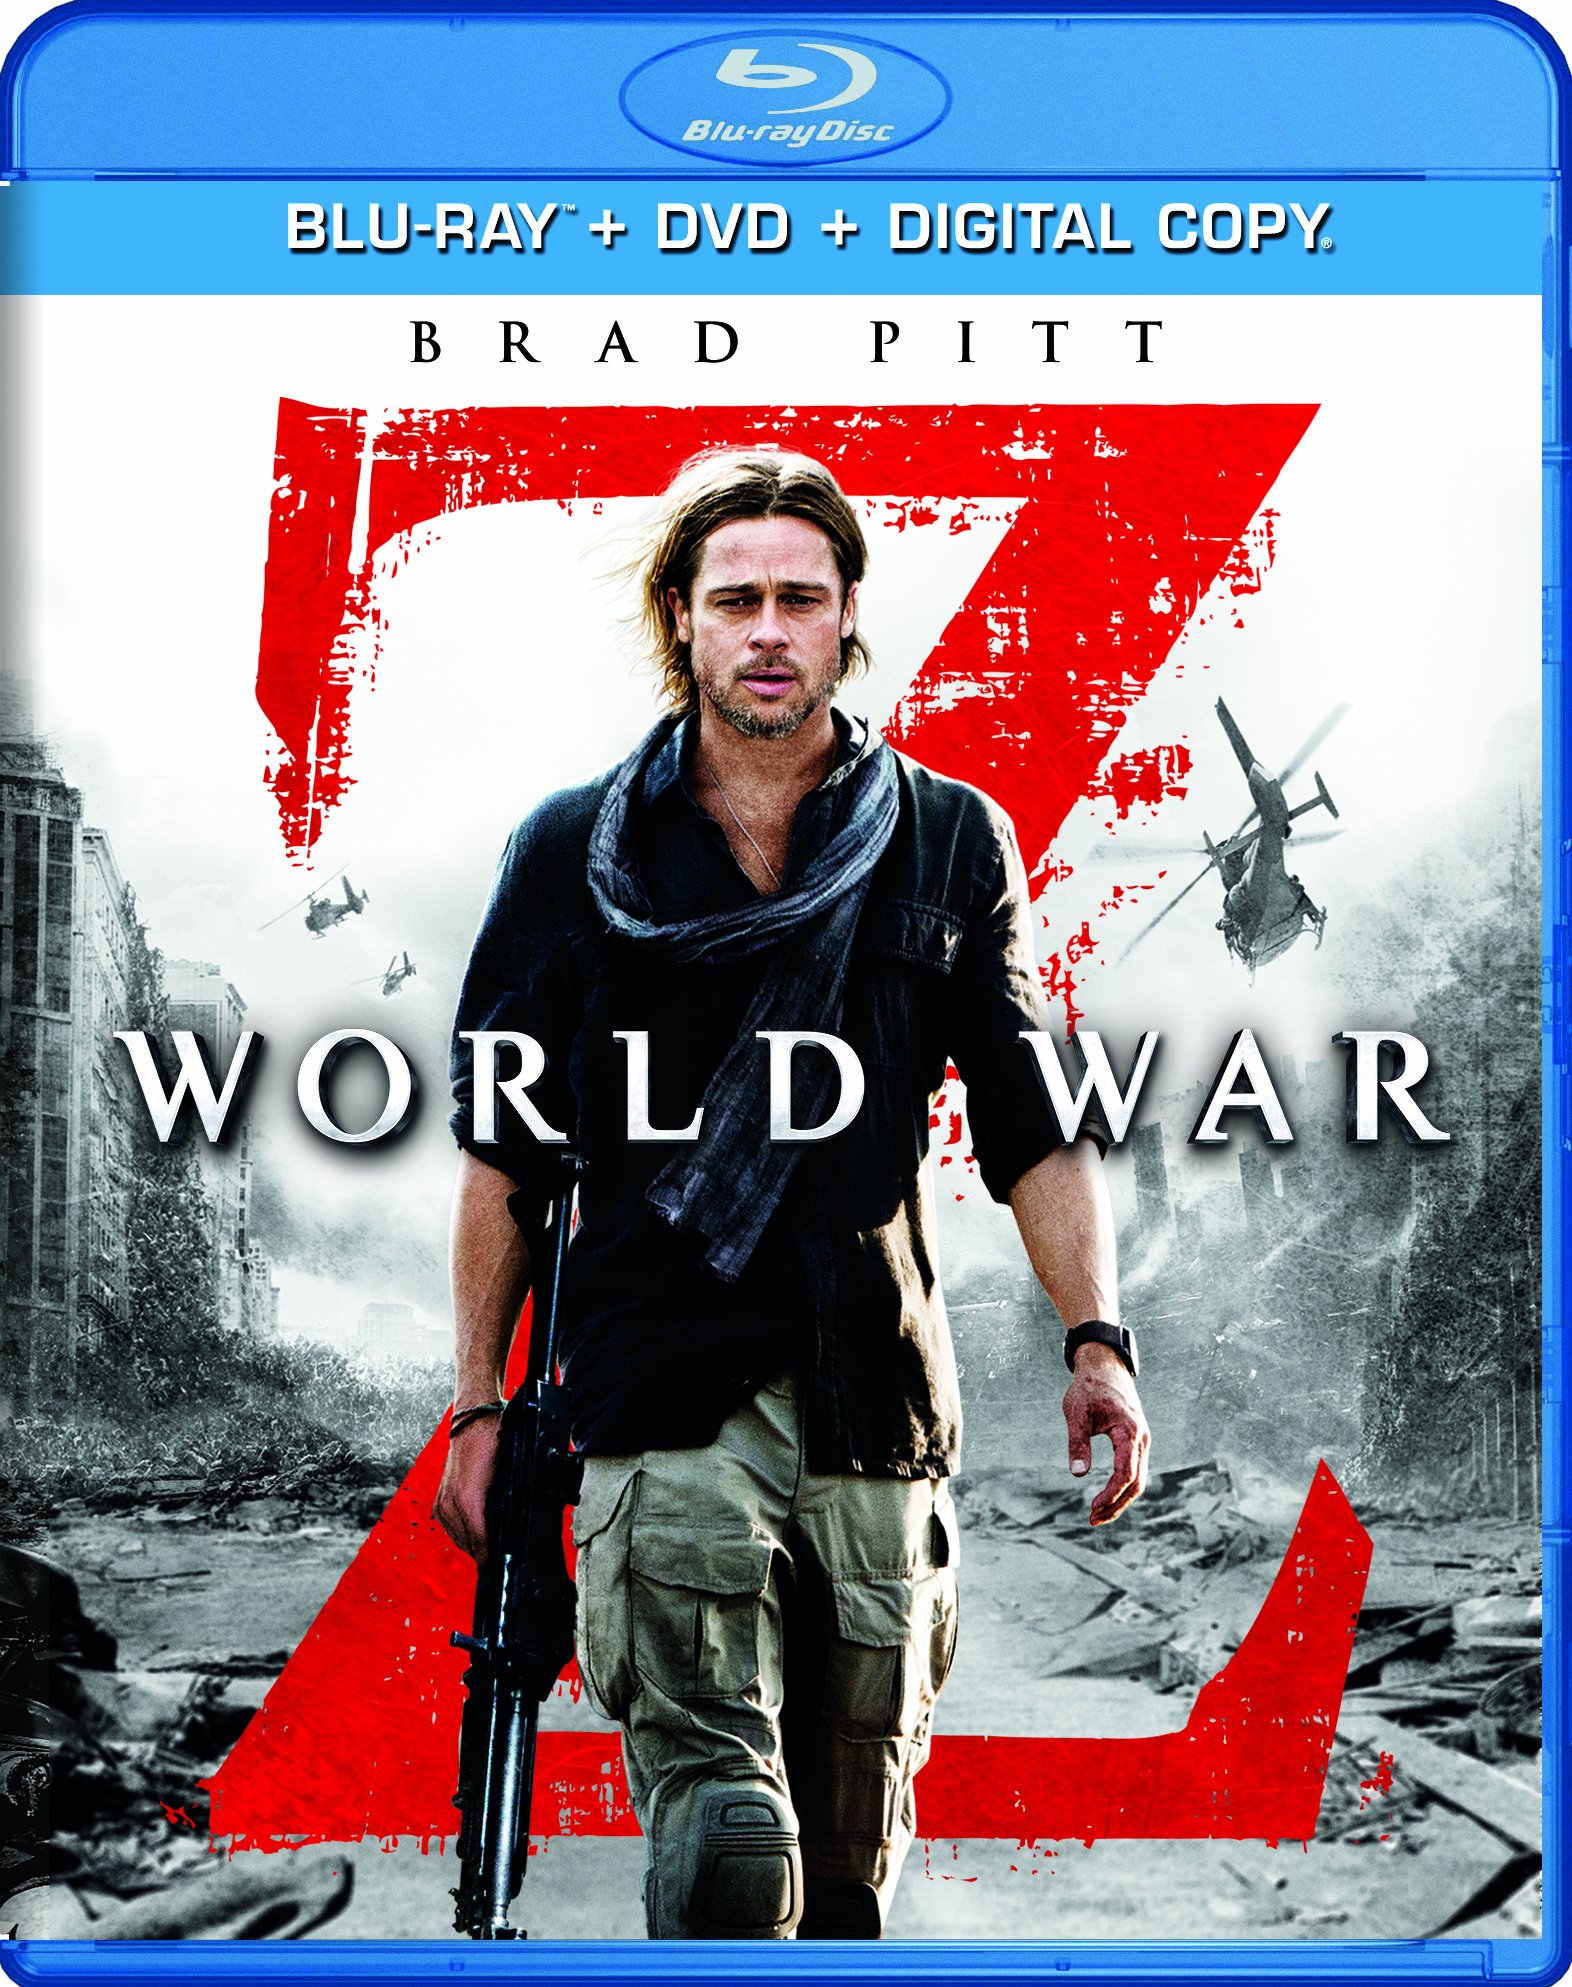 World War Z (Unrated) (Blu-ray + DVD + Digital Copy), Paramount, Horror - image 4 of 4